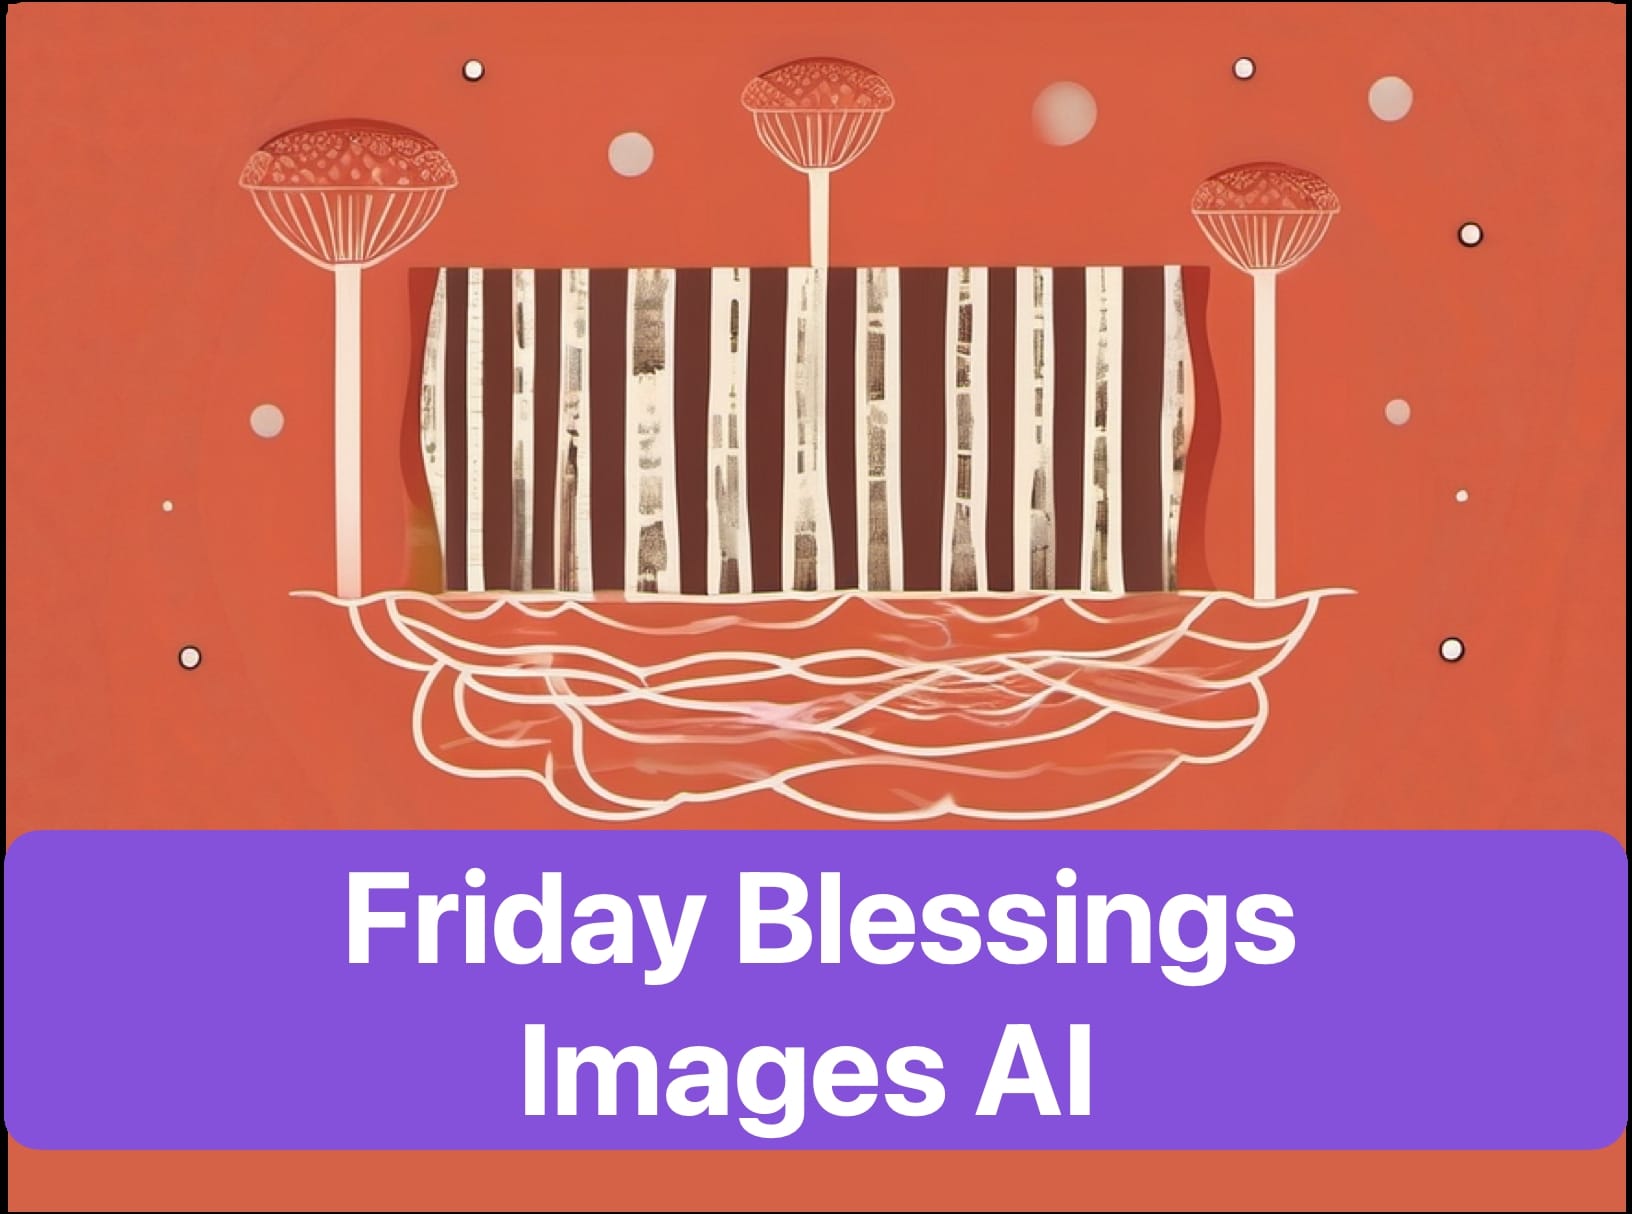 Share Blessings with Friday Blessings Images AI